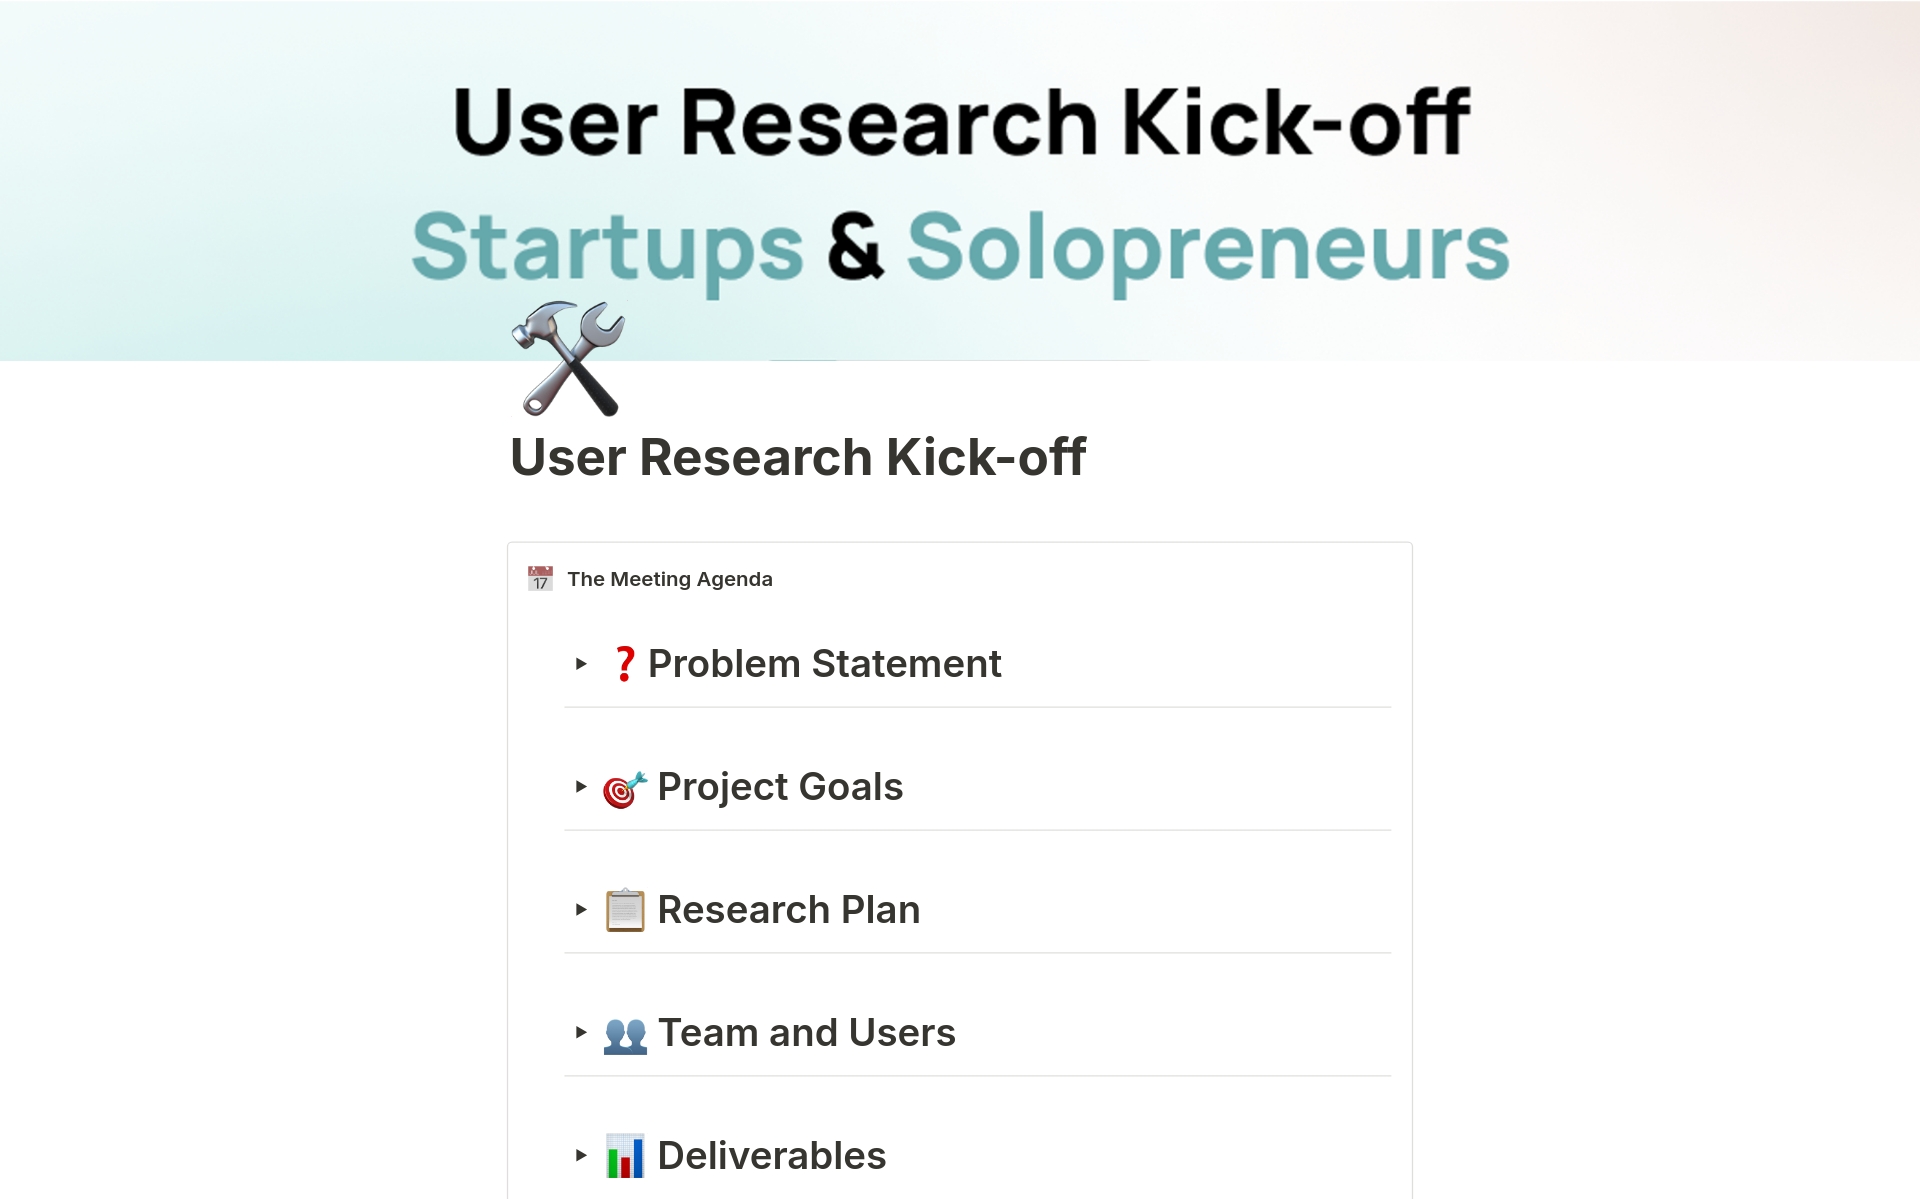 Kickstart user research with “🚦 User Research Kick-off” from 80/20 Design. Perfect for solopreneurs & startups, this Notion template guides your insight discovery 🌱.
Explore more tools at www.8020d.com.